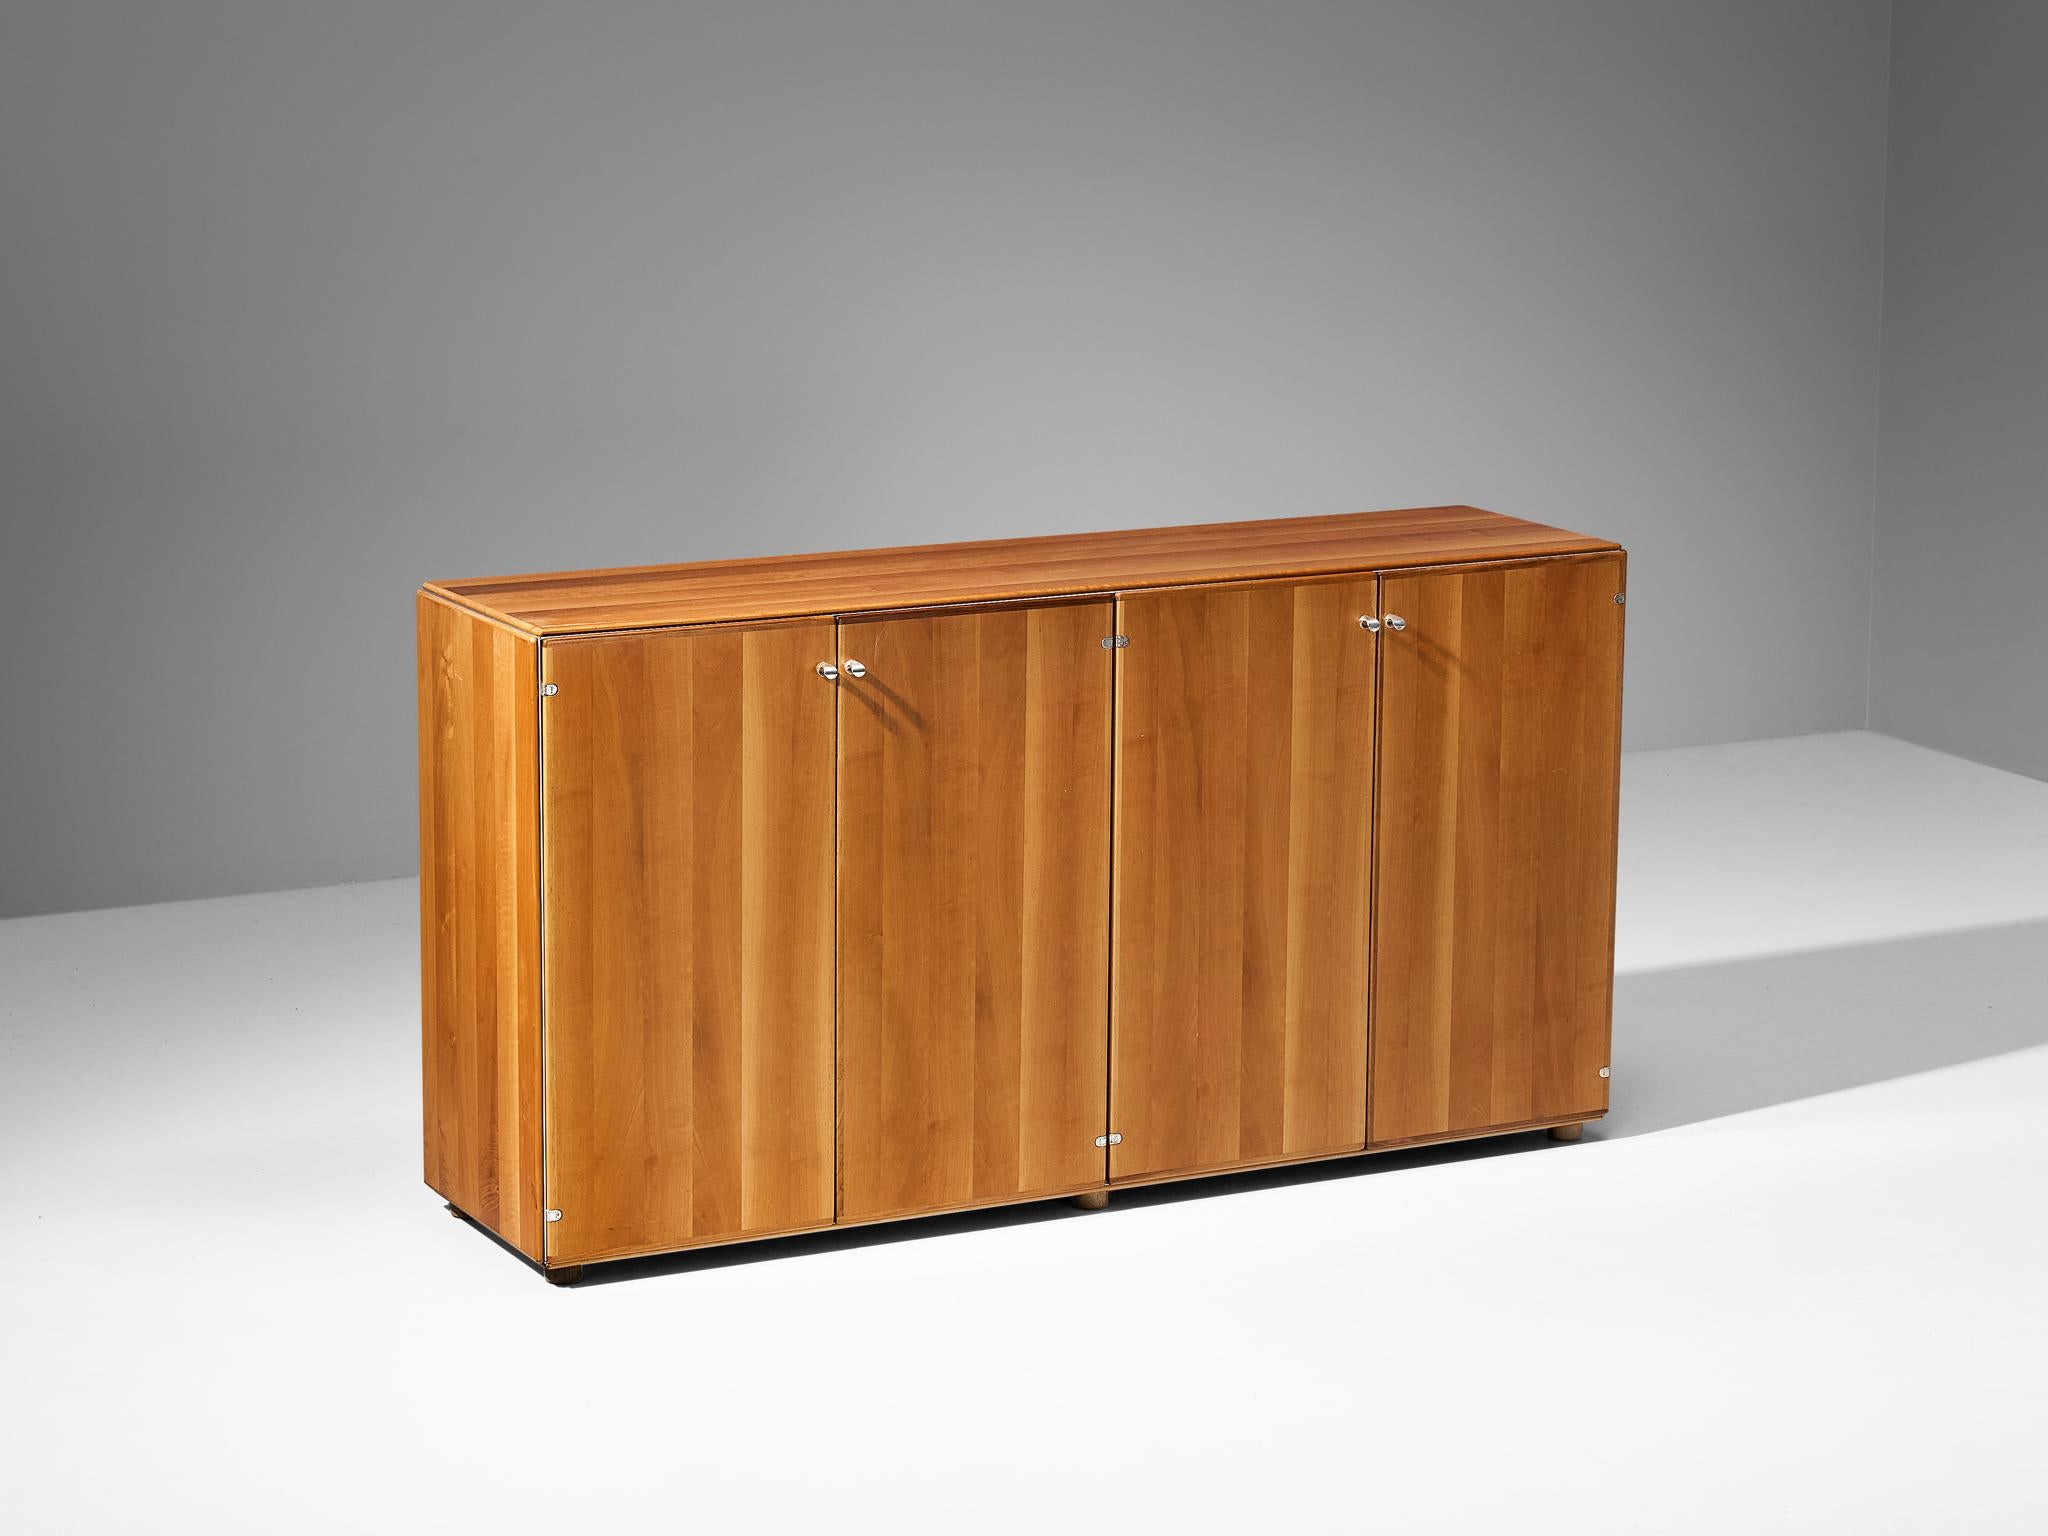 Afra & Tobia Scarpa for Stildomus, 'Torcello' sideboard, walnut, aluminum, Italy, 1964.

The 'Torcello' model is a rare find and is produced by the Italian company Stildomus, a furniture company that continuously strived in finding the perfect